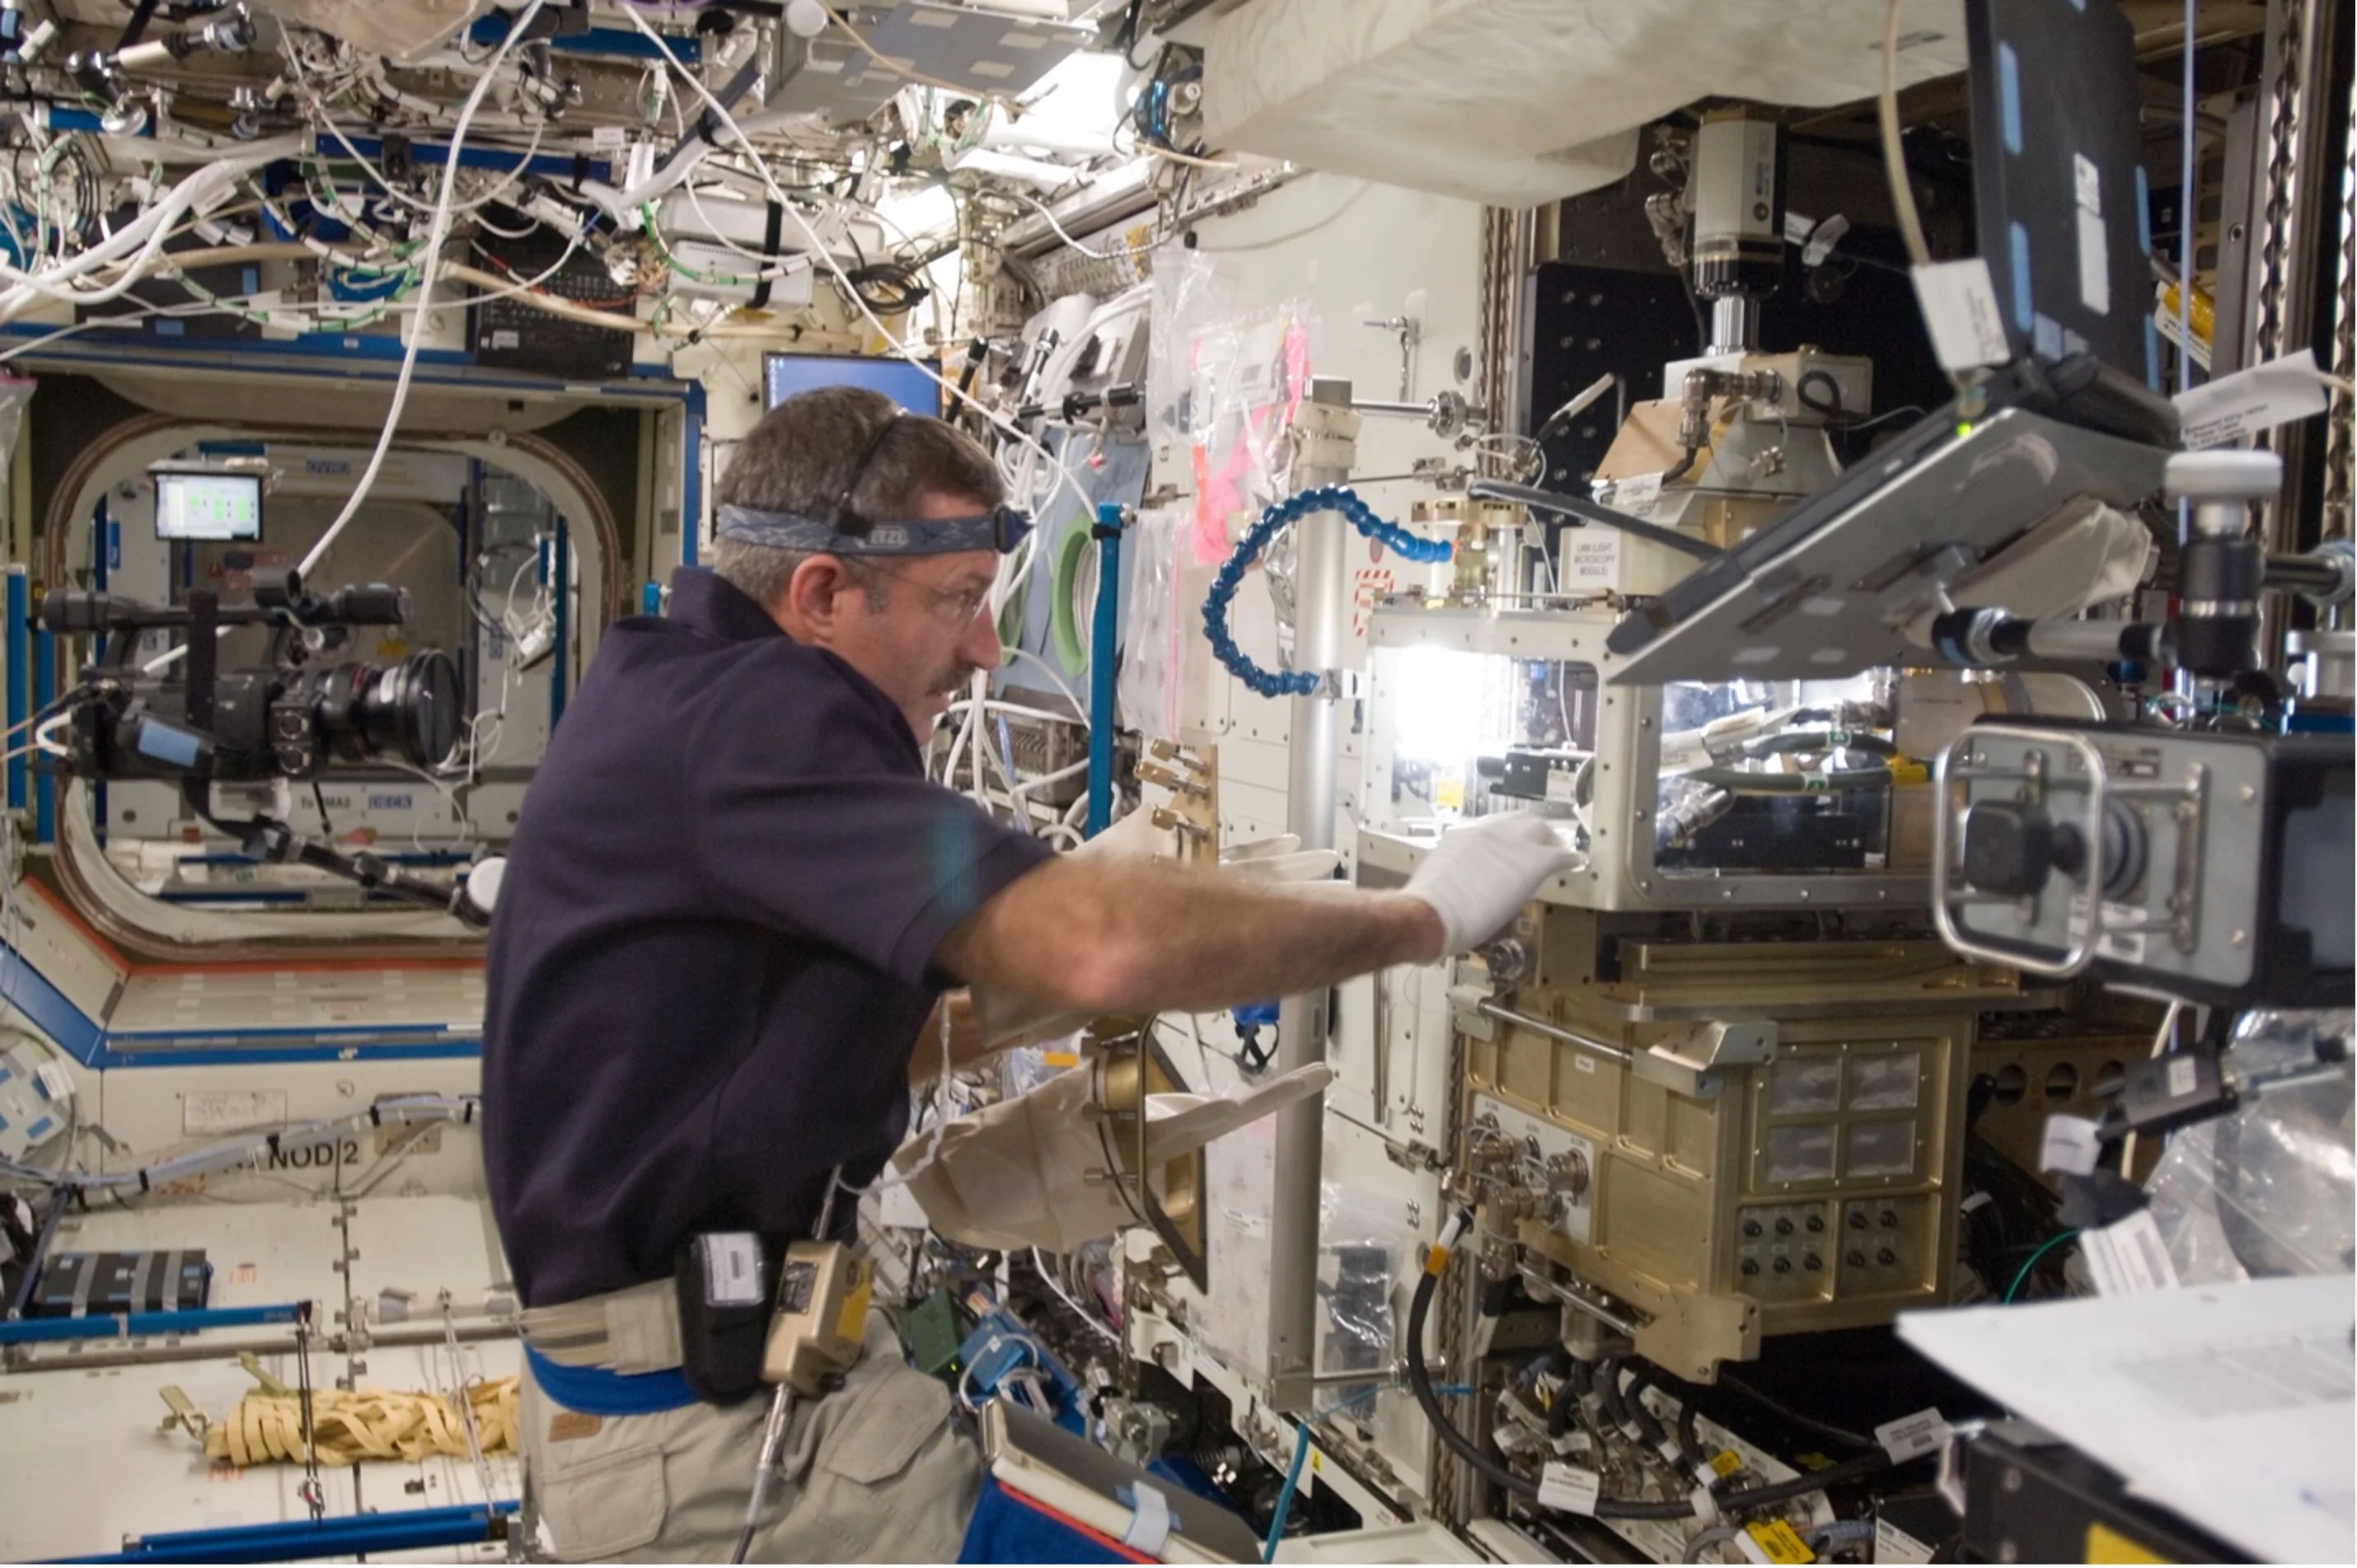 Astronaut inside the International Space Station holding onto white framed box with bright open area containing black wires and other mechanics inside.